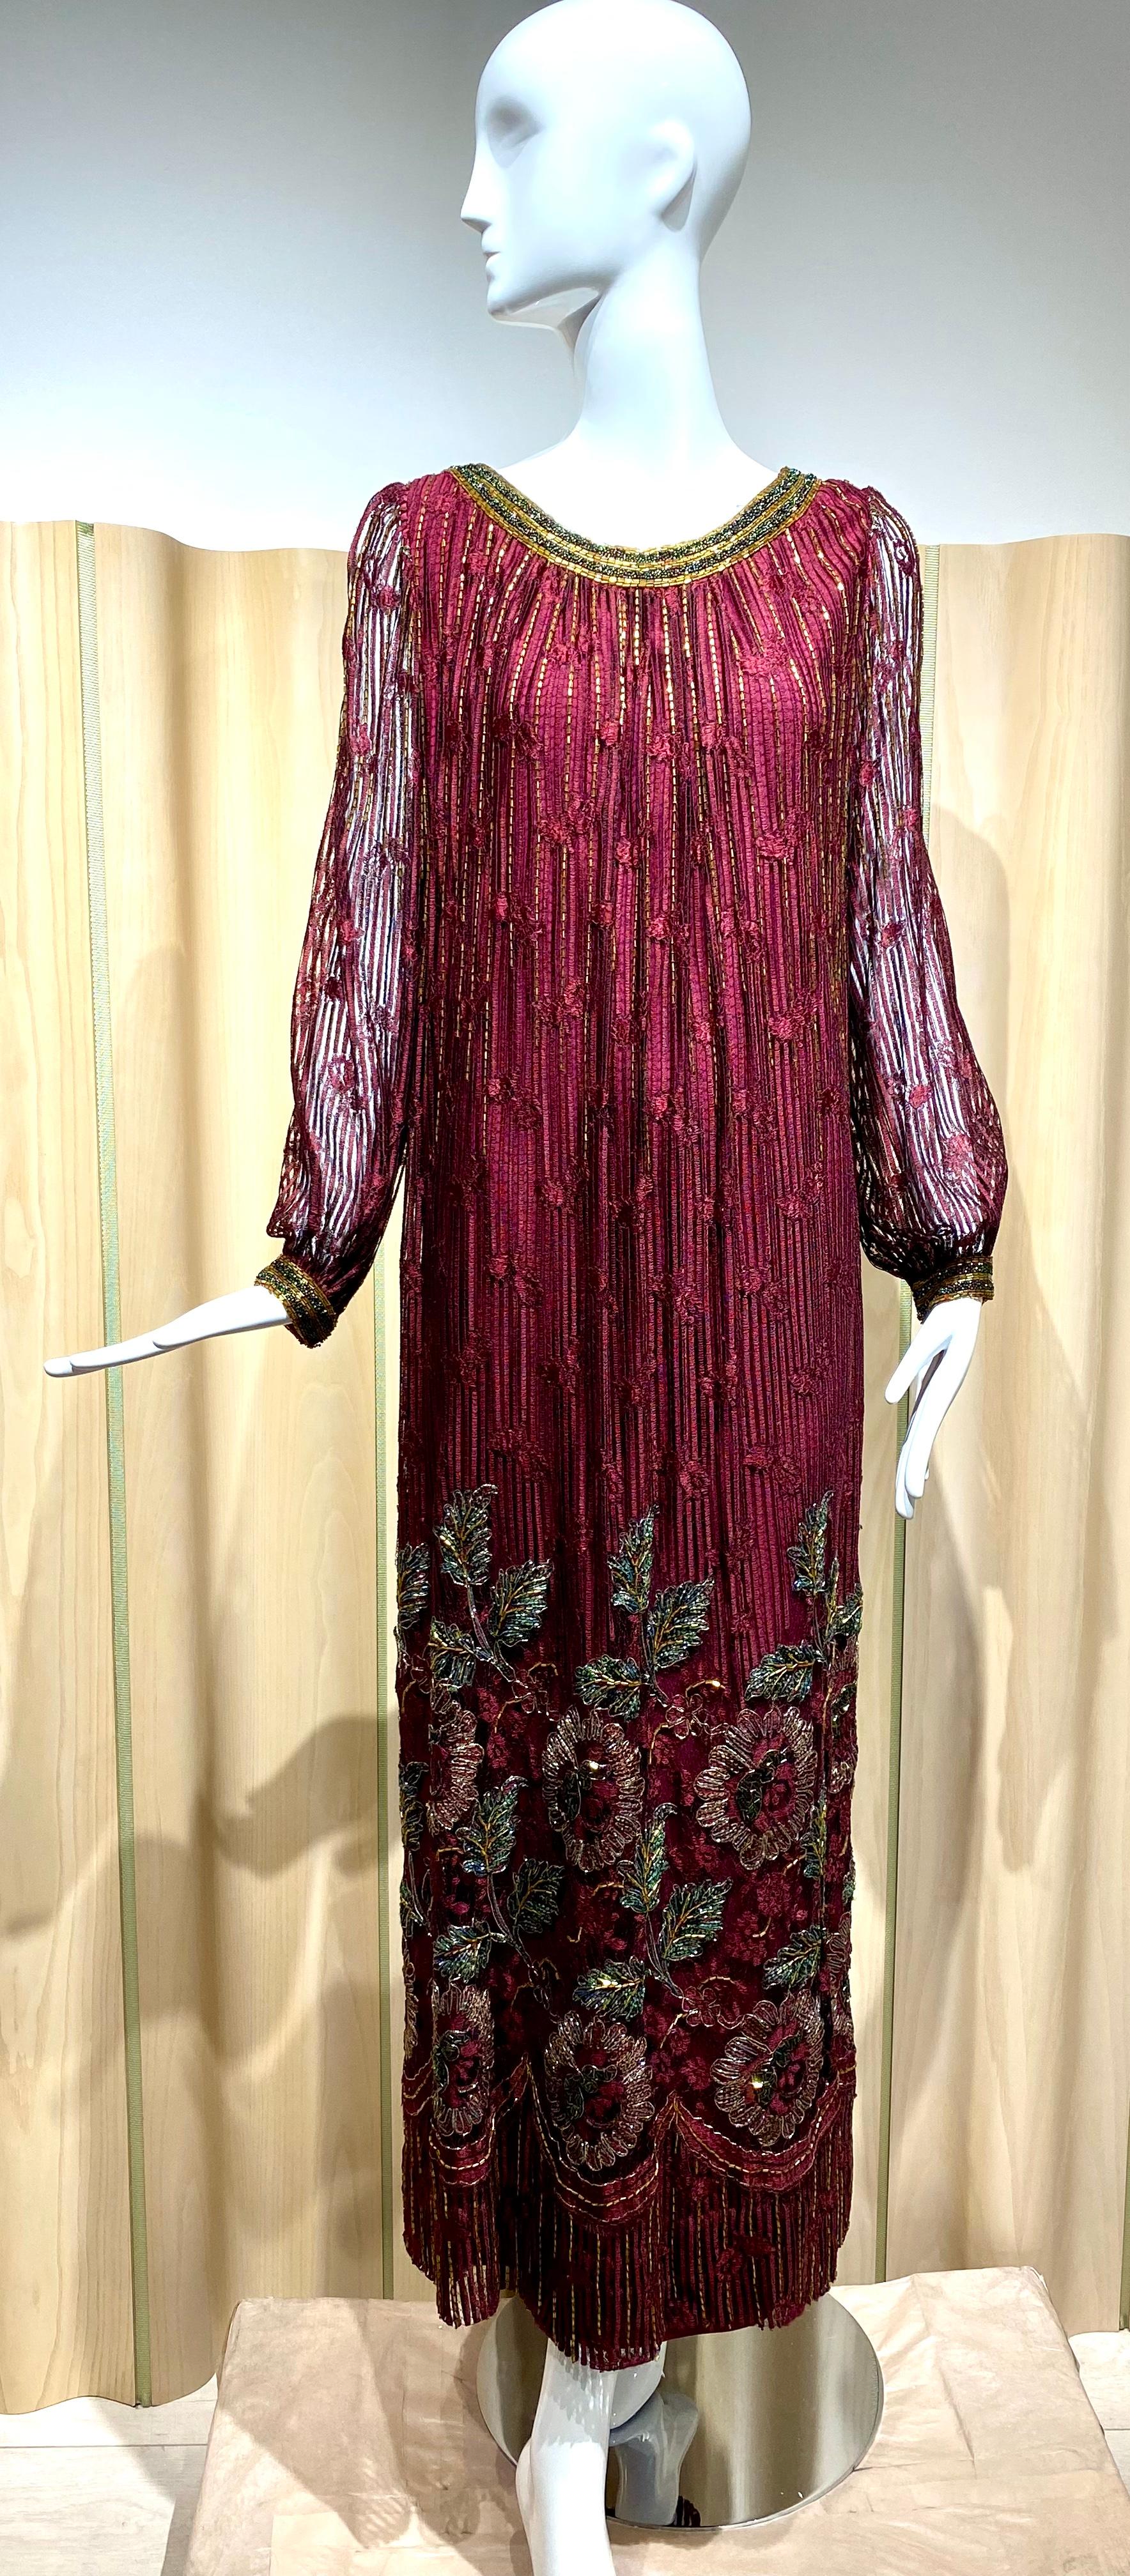 80s Alfred Bosand Burgundy red maxi long sleeve gown with embroidery.
Size: Medium
Bust: 38” / Waist: 36” / Hip: 42” / Dress length 54” / Sleeve length: 25”